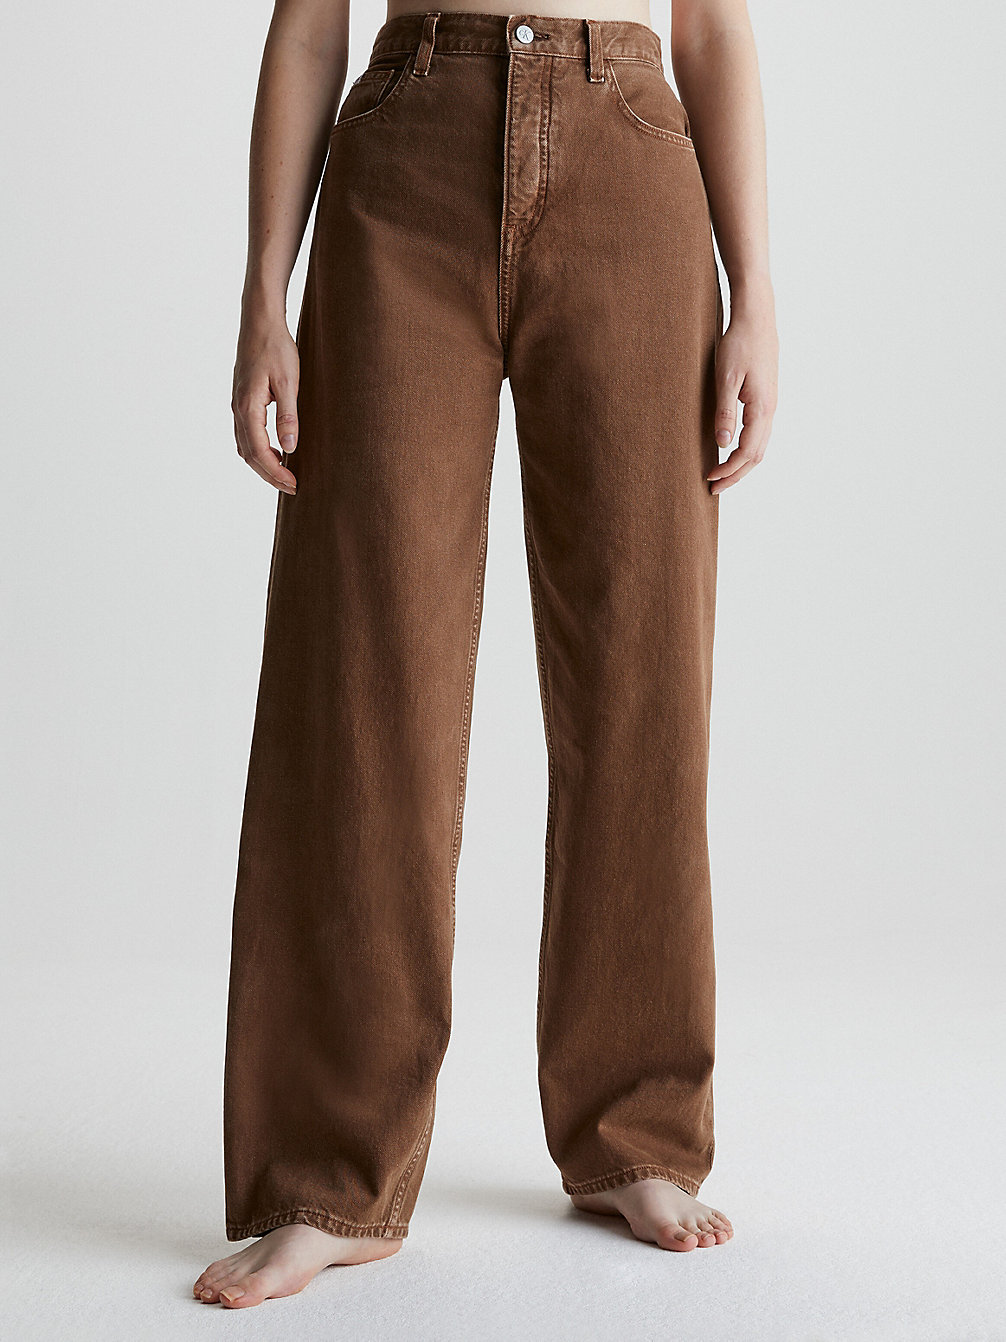 BISON > High Rise Relaxed Jeans > undefined Damen - Calvin Klein